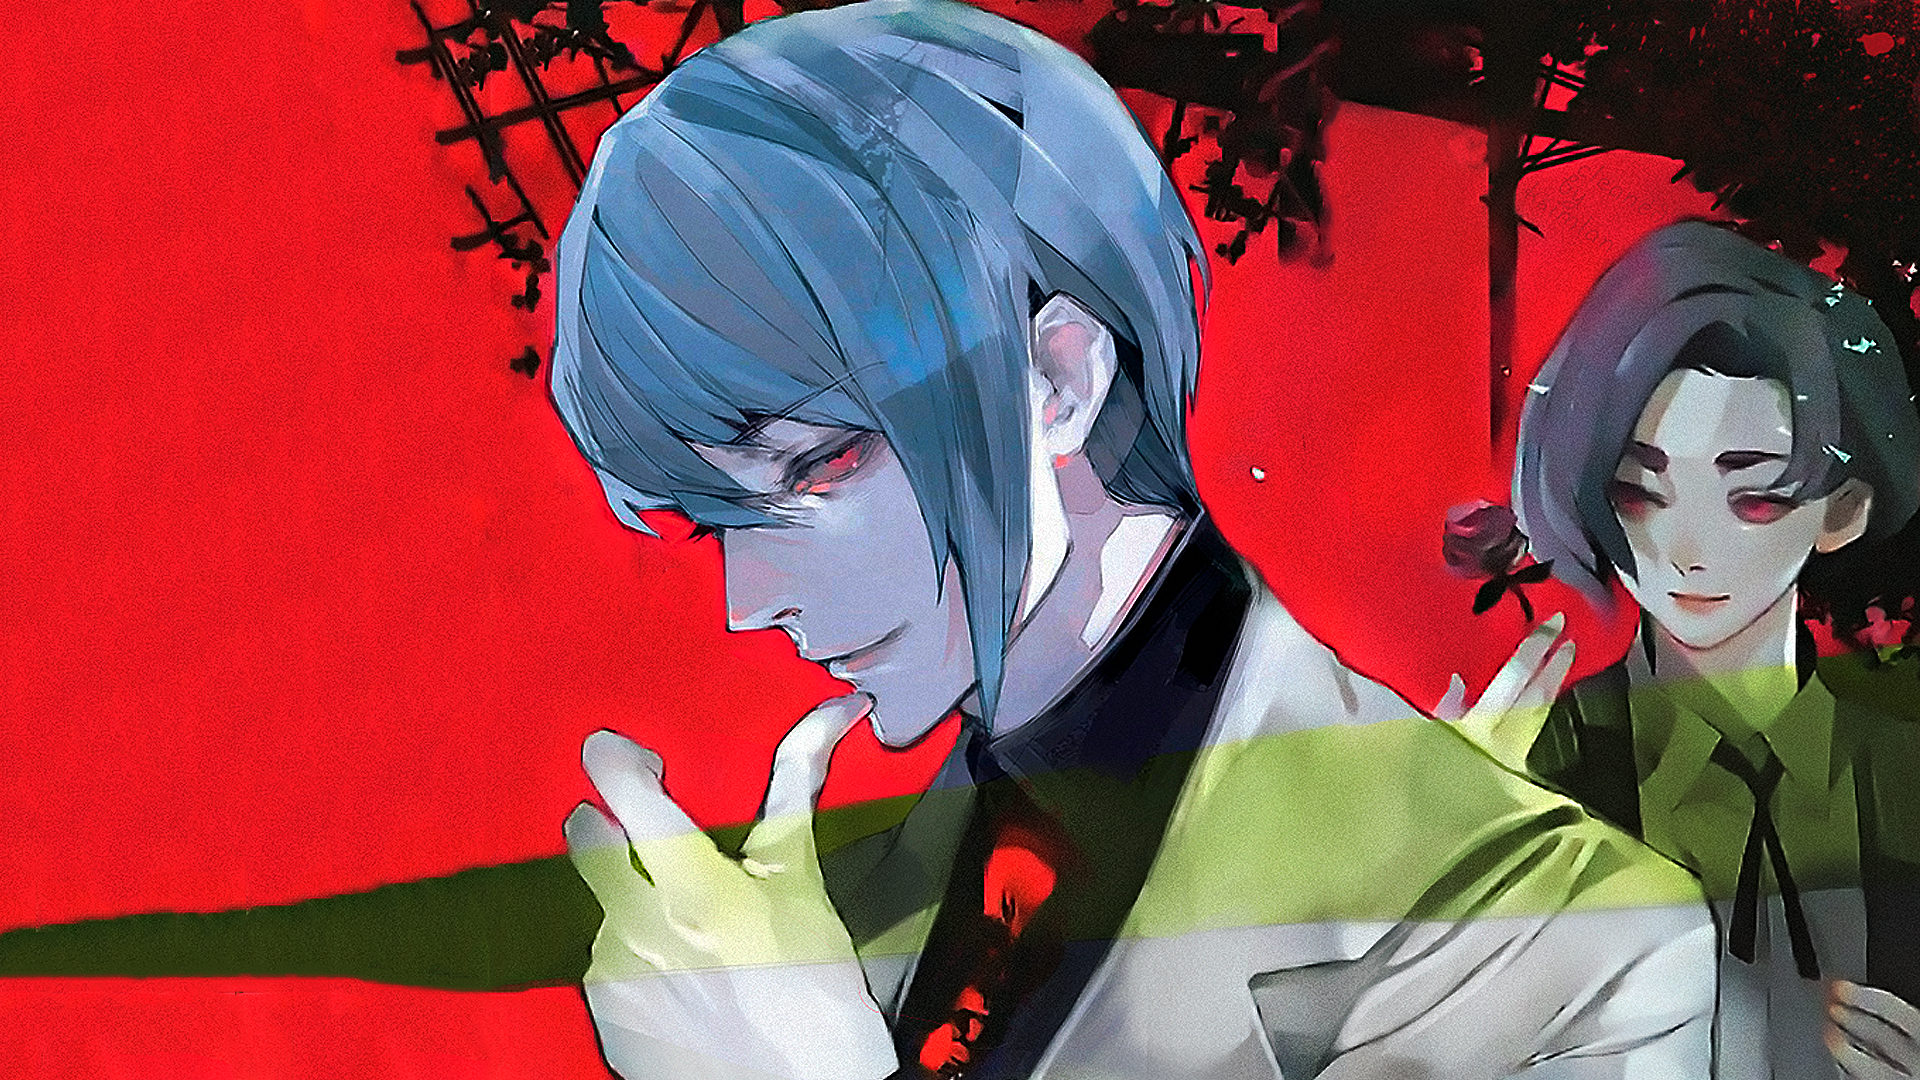 Wallpaper from volume covers. Tokyo ghoul manga, Tokyo ghoul fan art, Tokyo ghoul